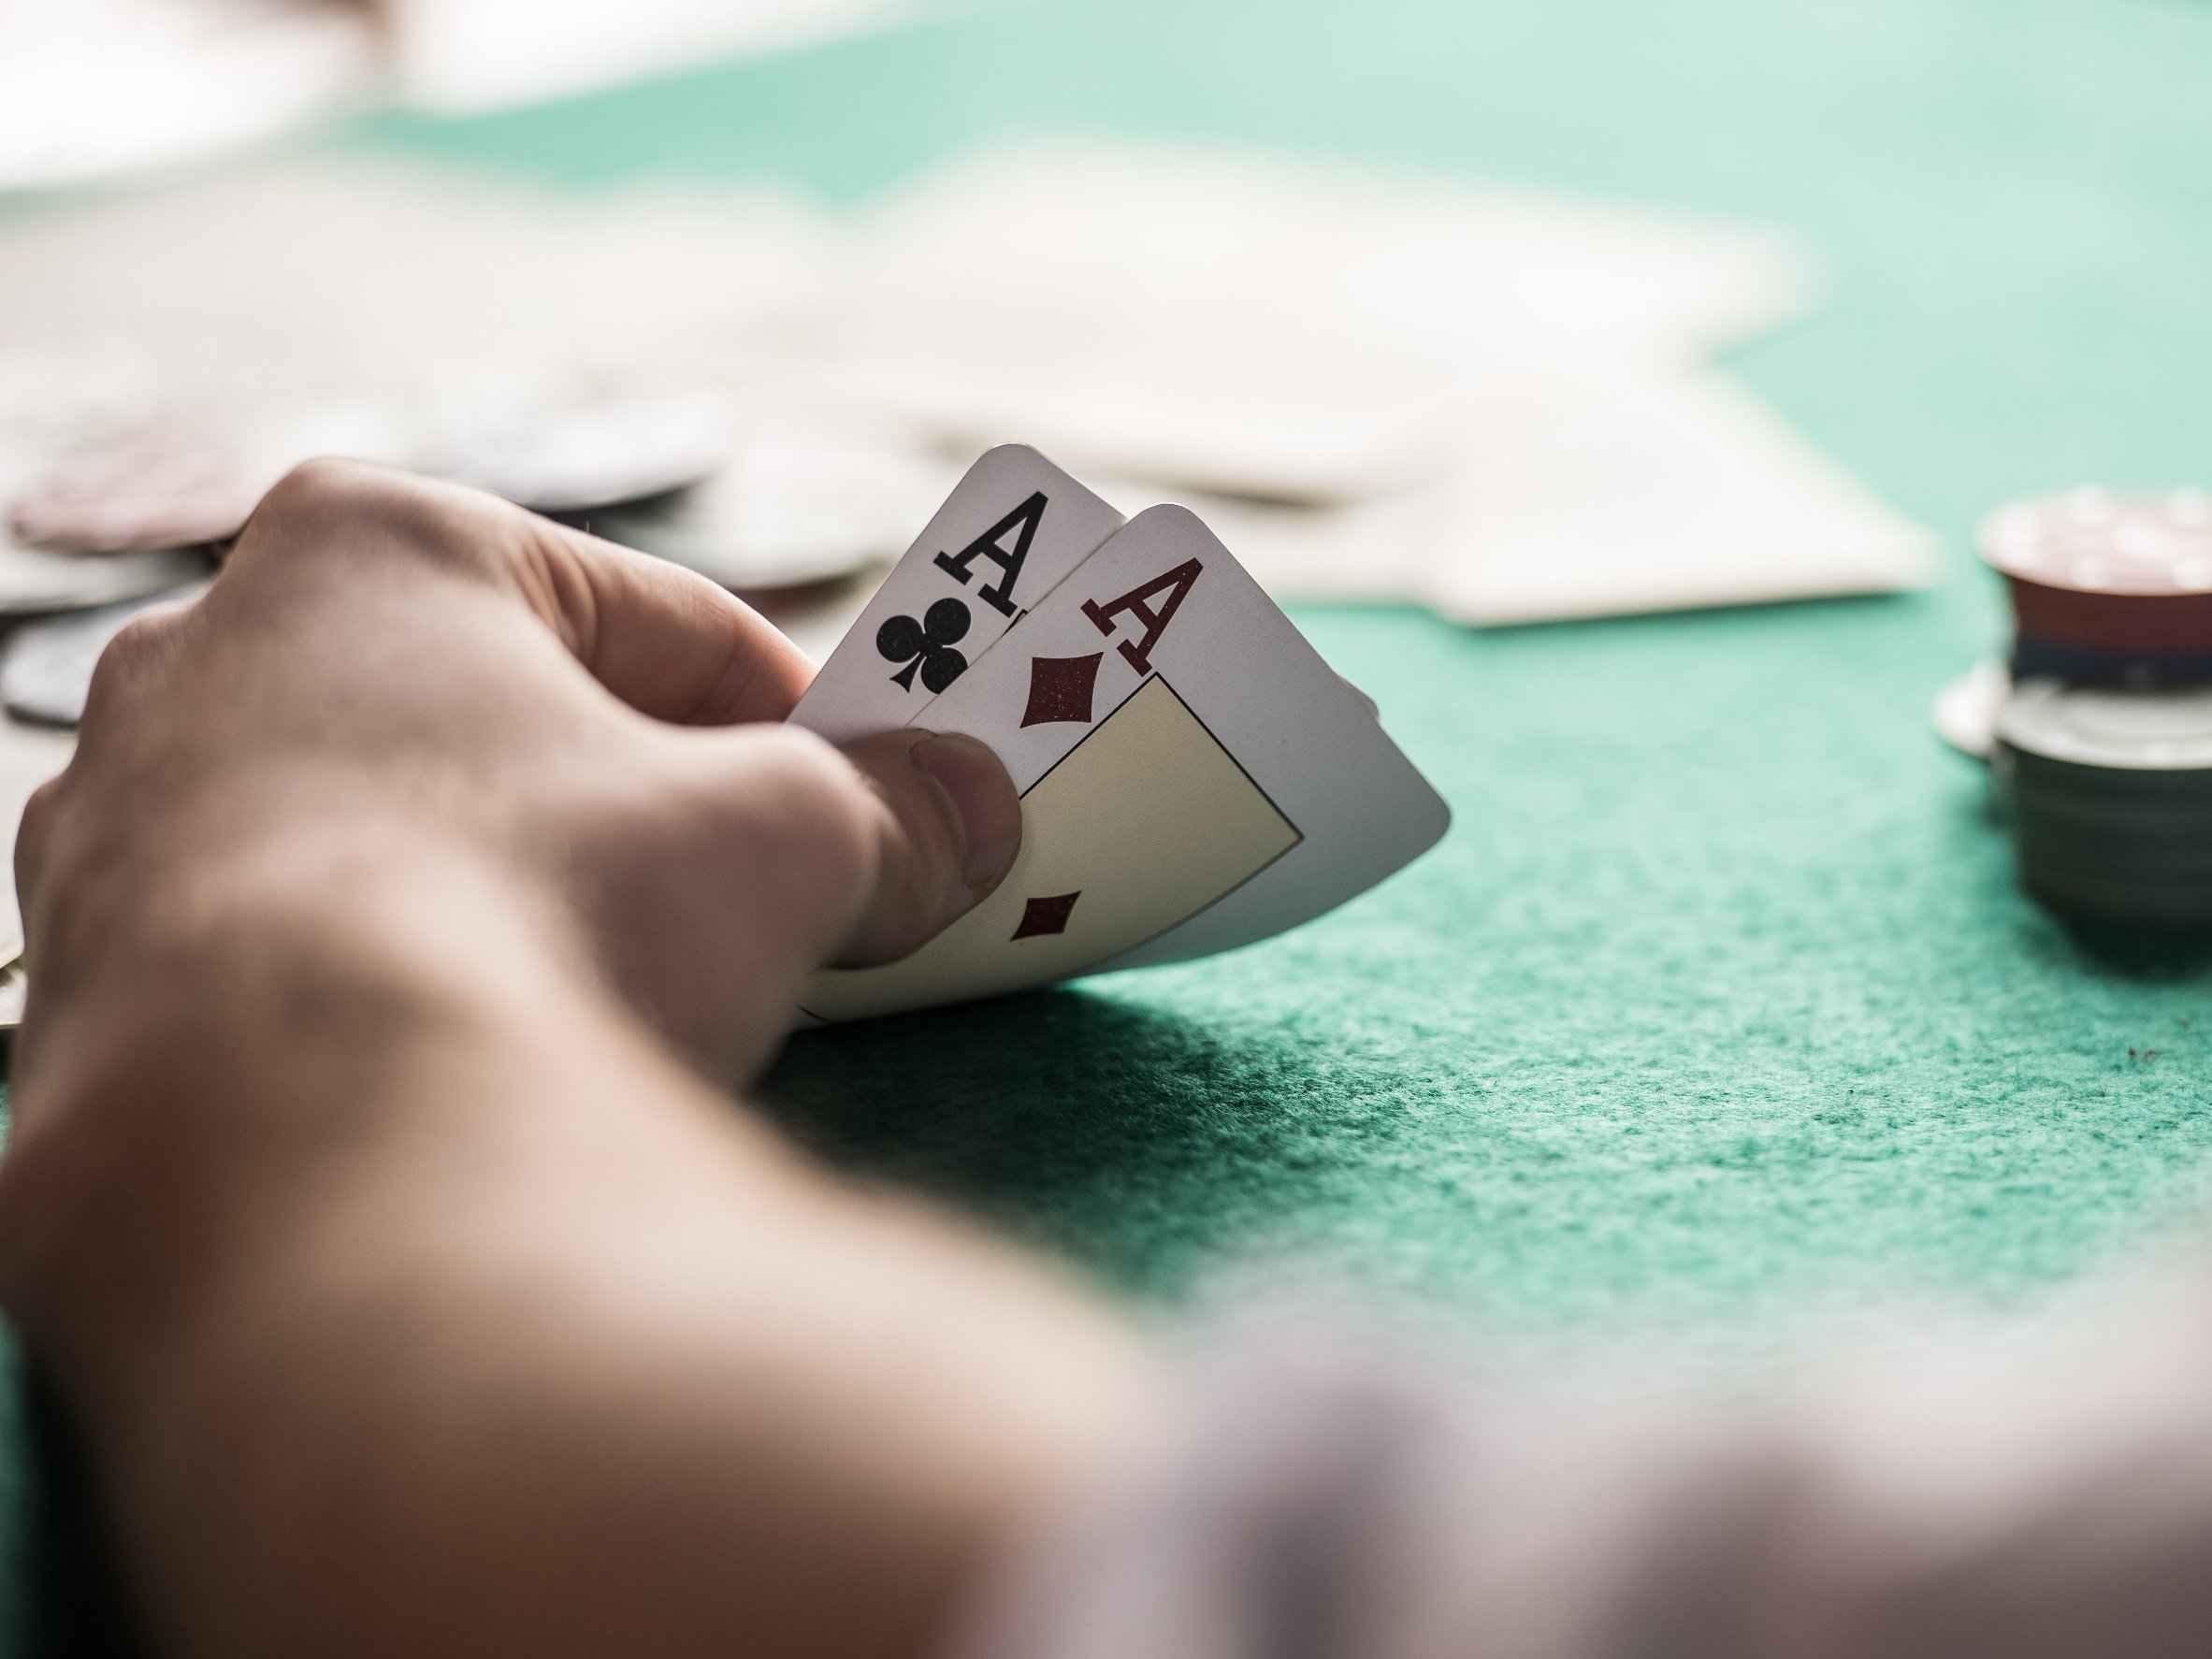 You are currently viewing HISTORY OF POKER FROM ITS ORIGIN TO THE MODERN AGE